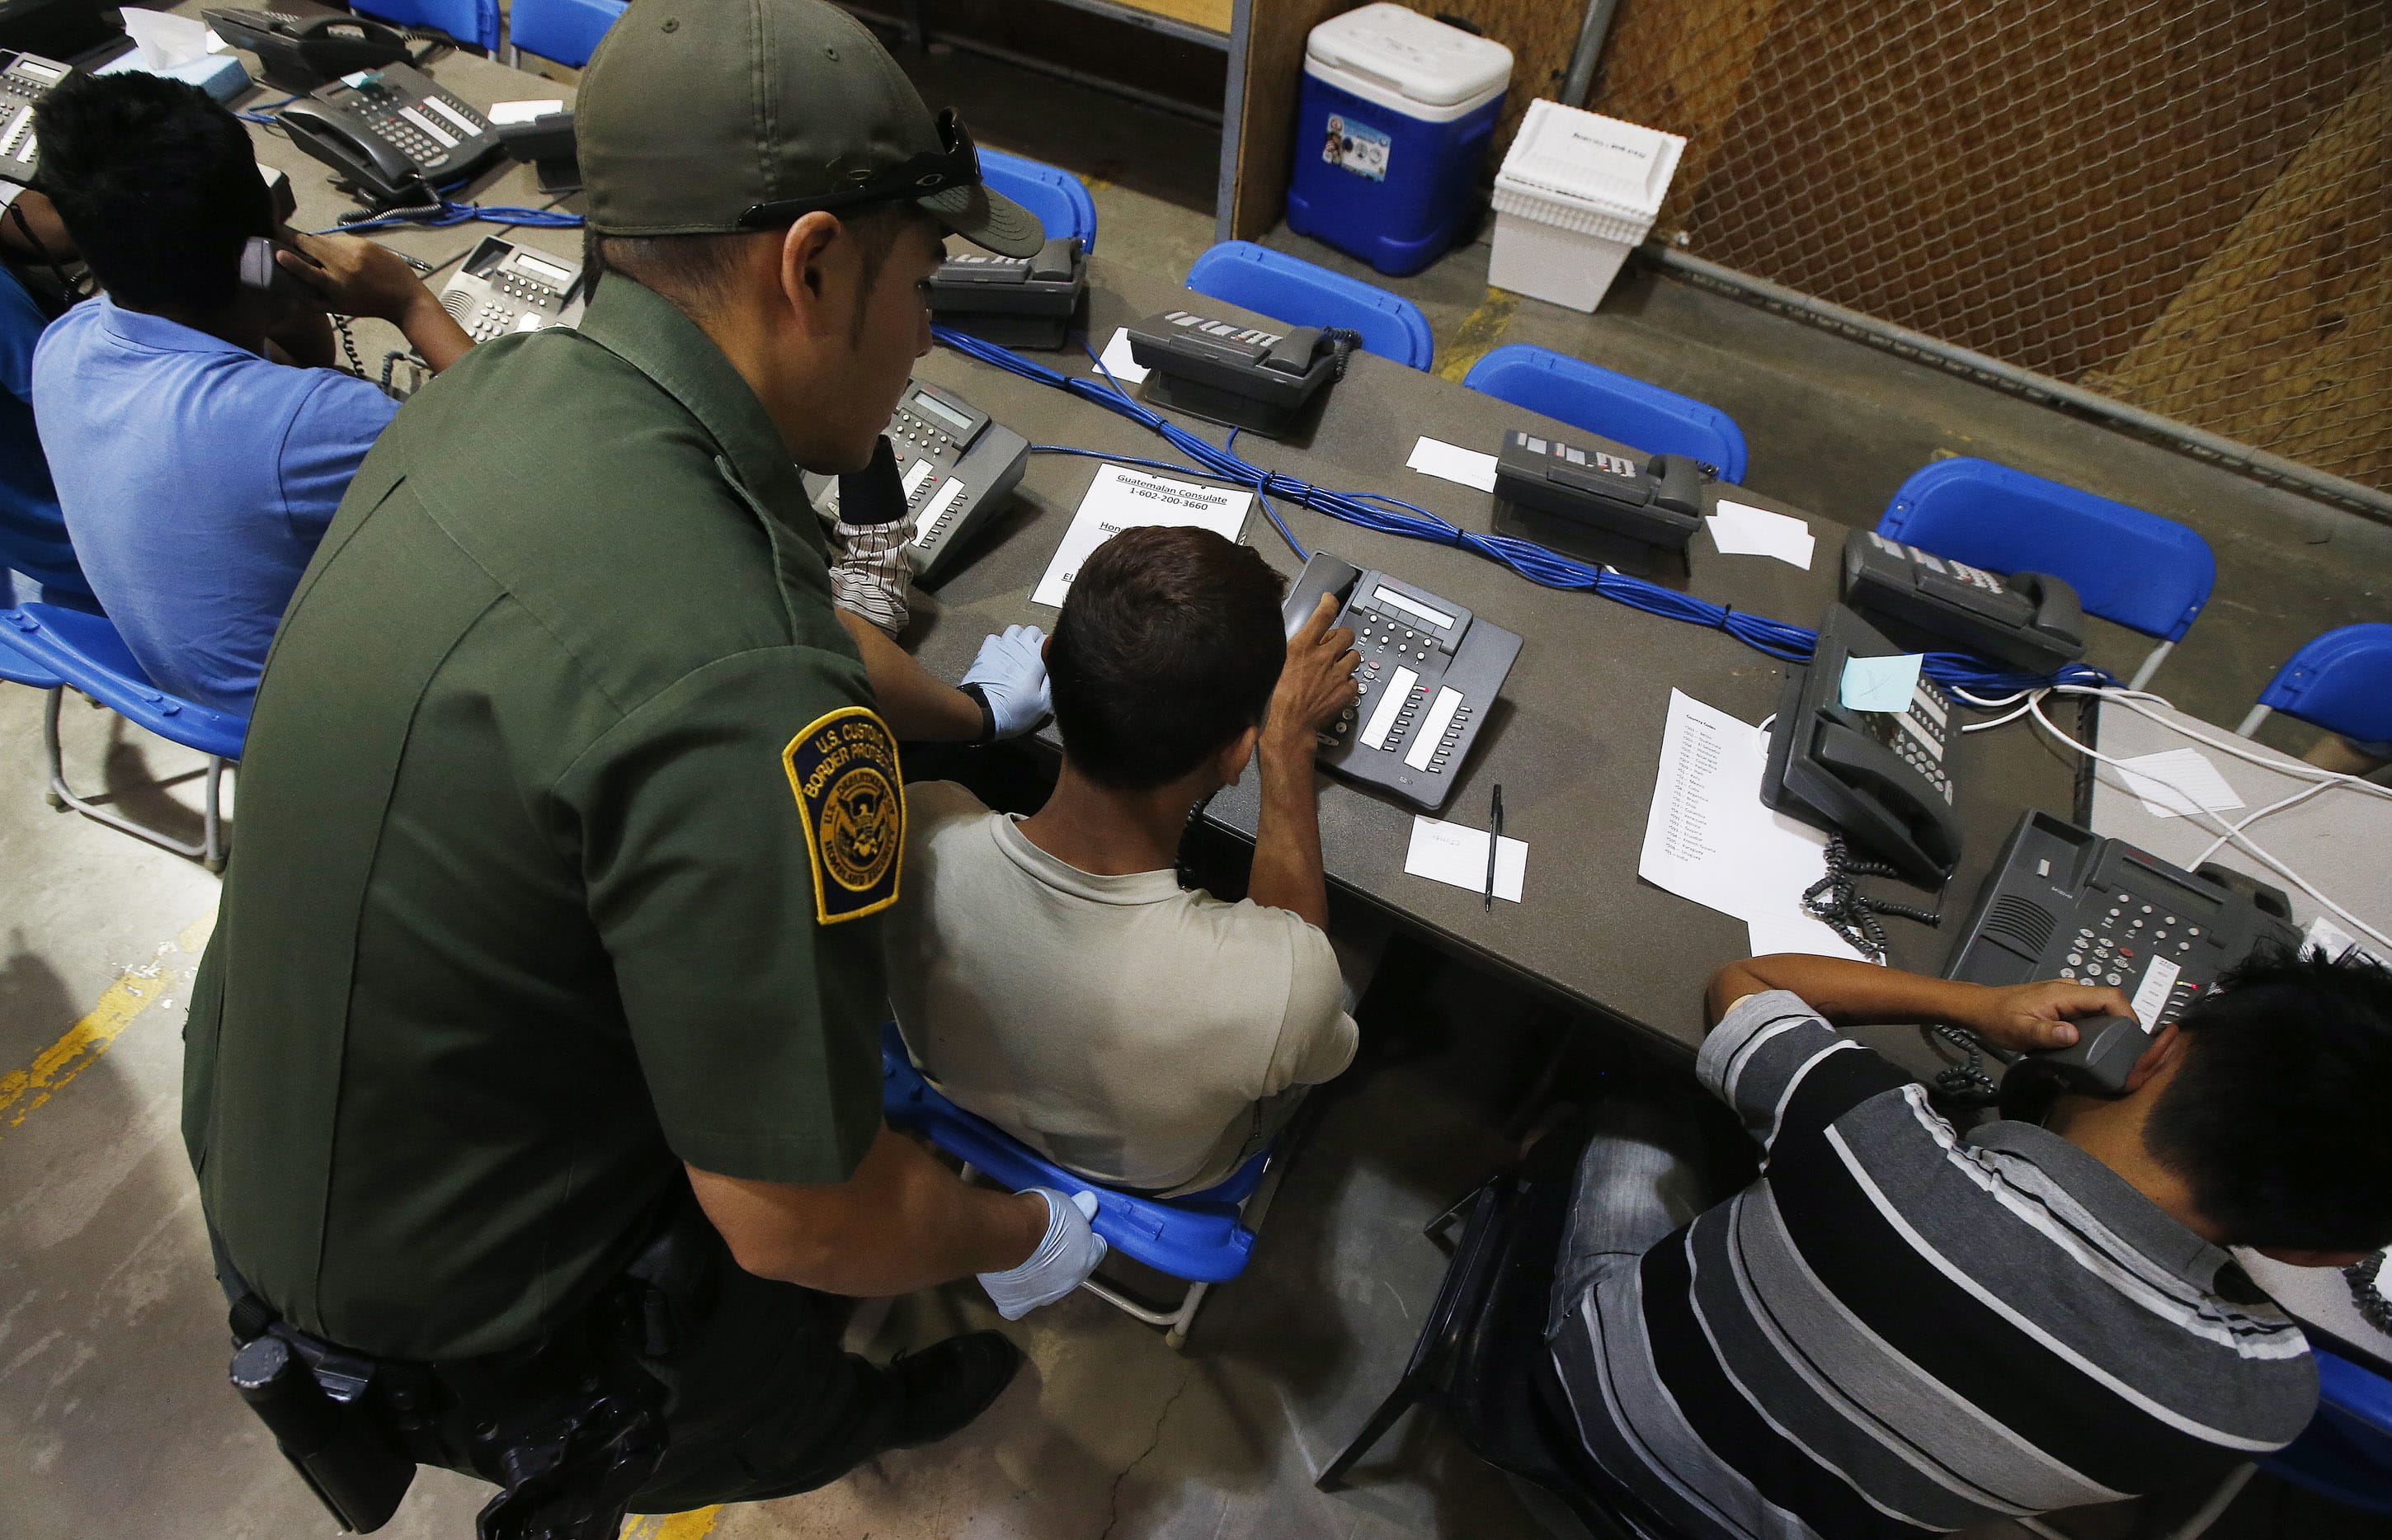 A U.S. Customs and Border Protection officer helps a few boys to make phone calls, some of the hundreds of mostly Central American immigrant children that are being processed and held at the U.S.